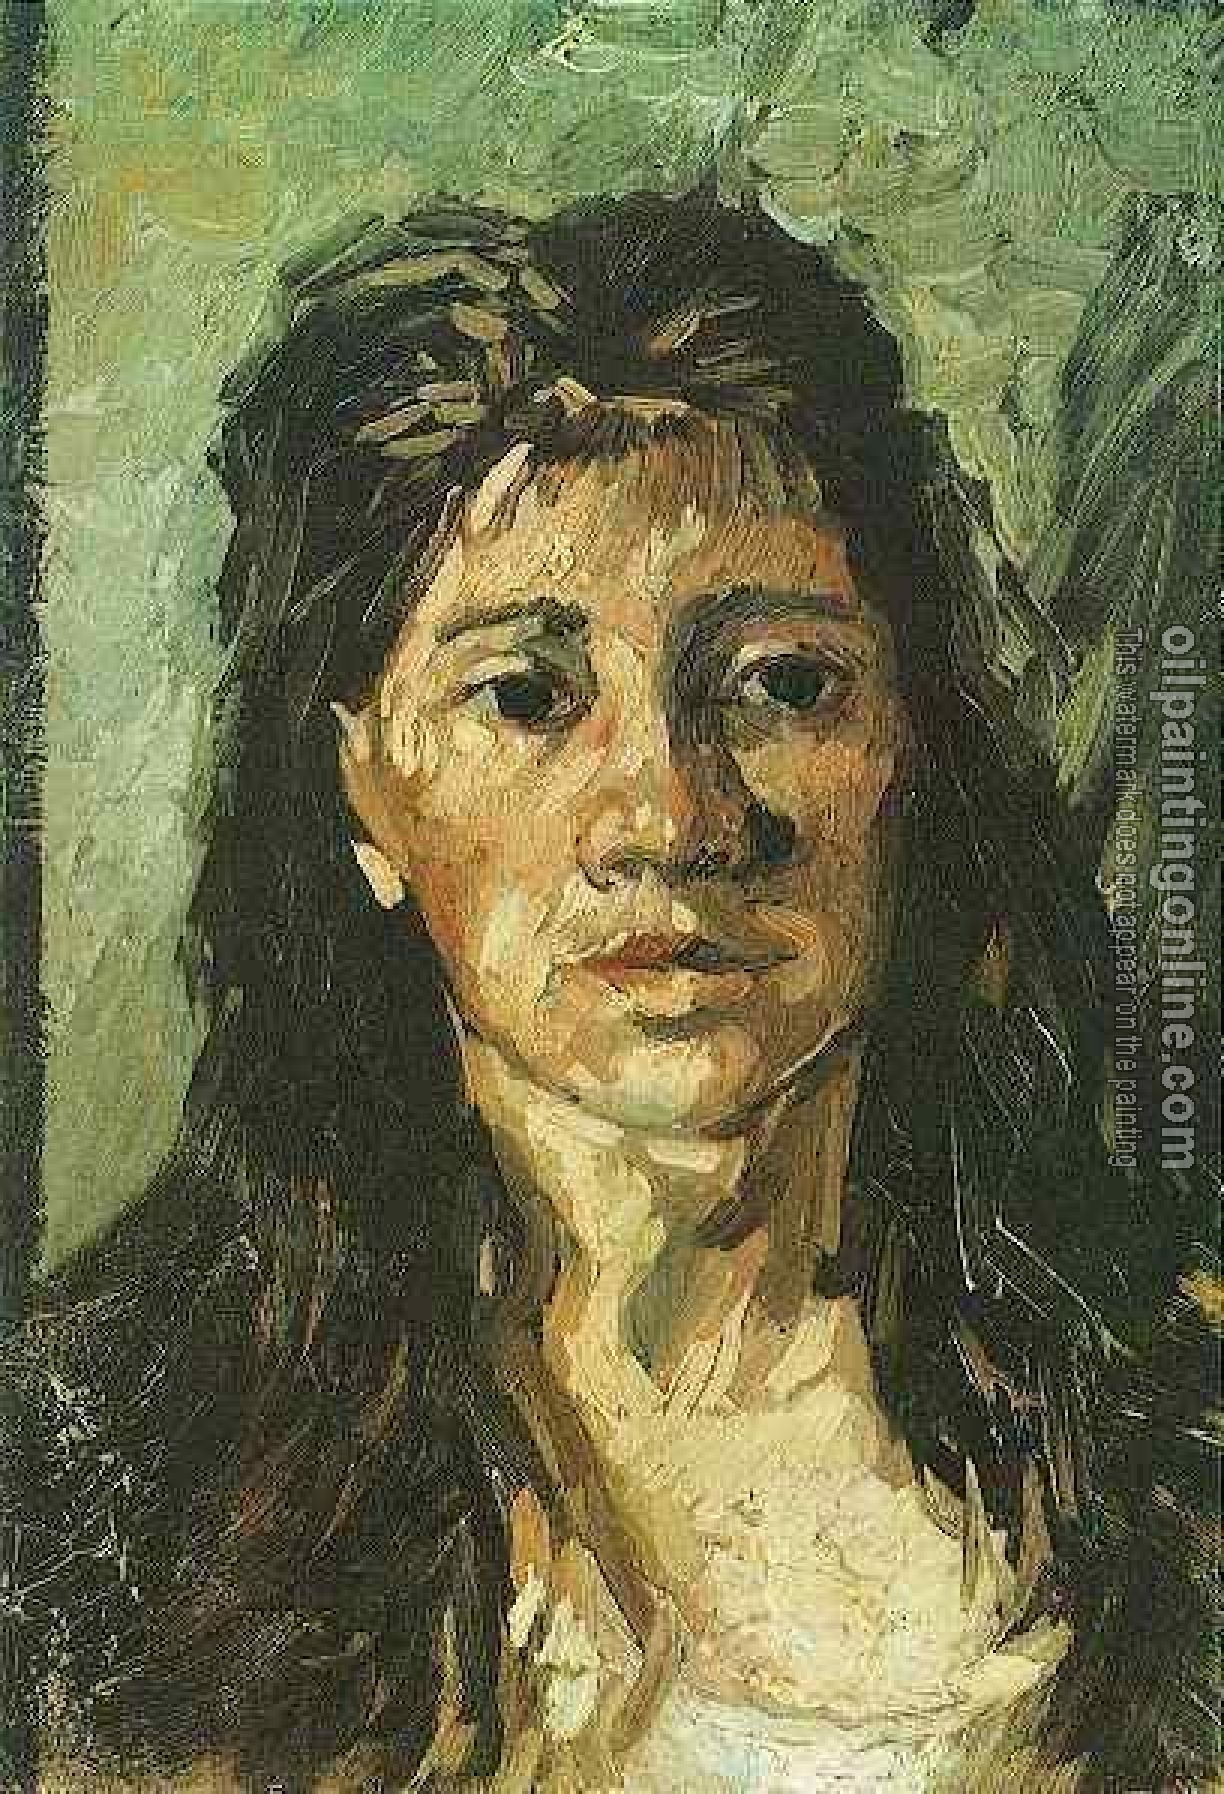 Gogh, Vincent van - Head of a Woman with her Hair Loose